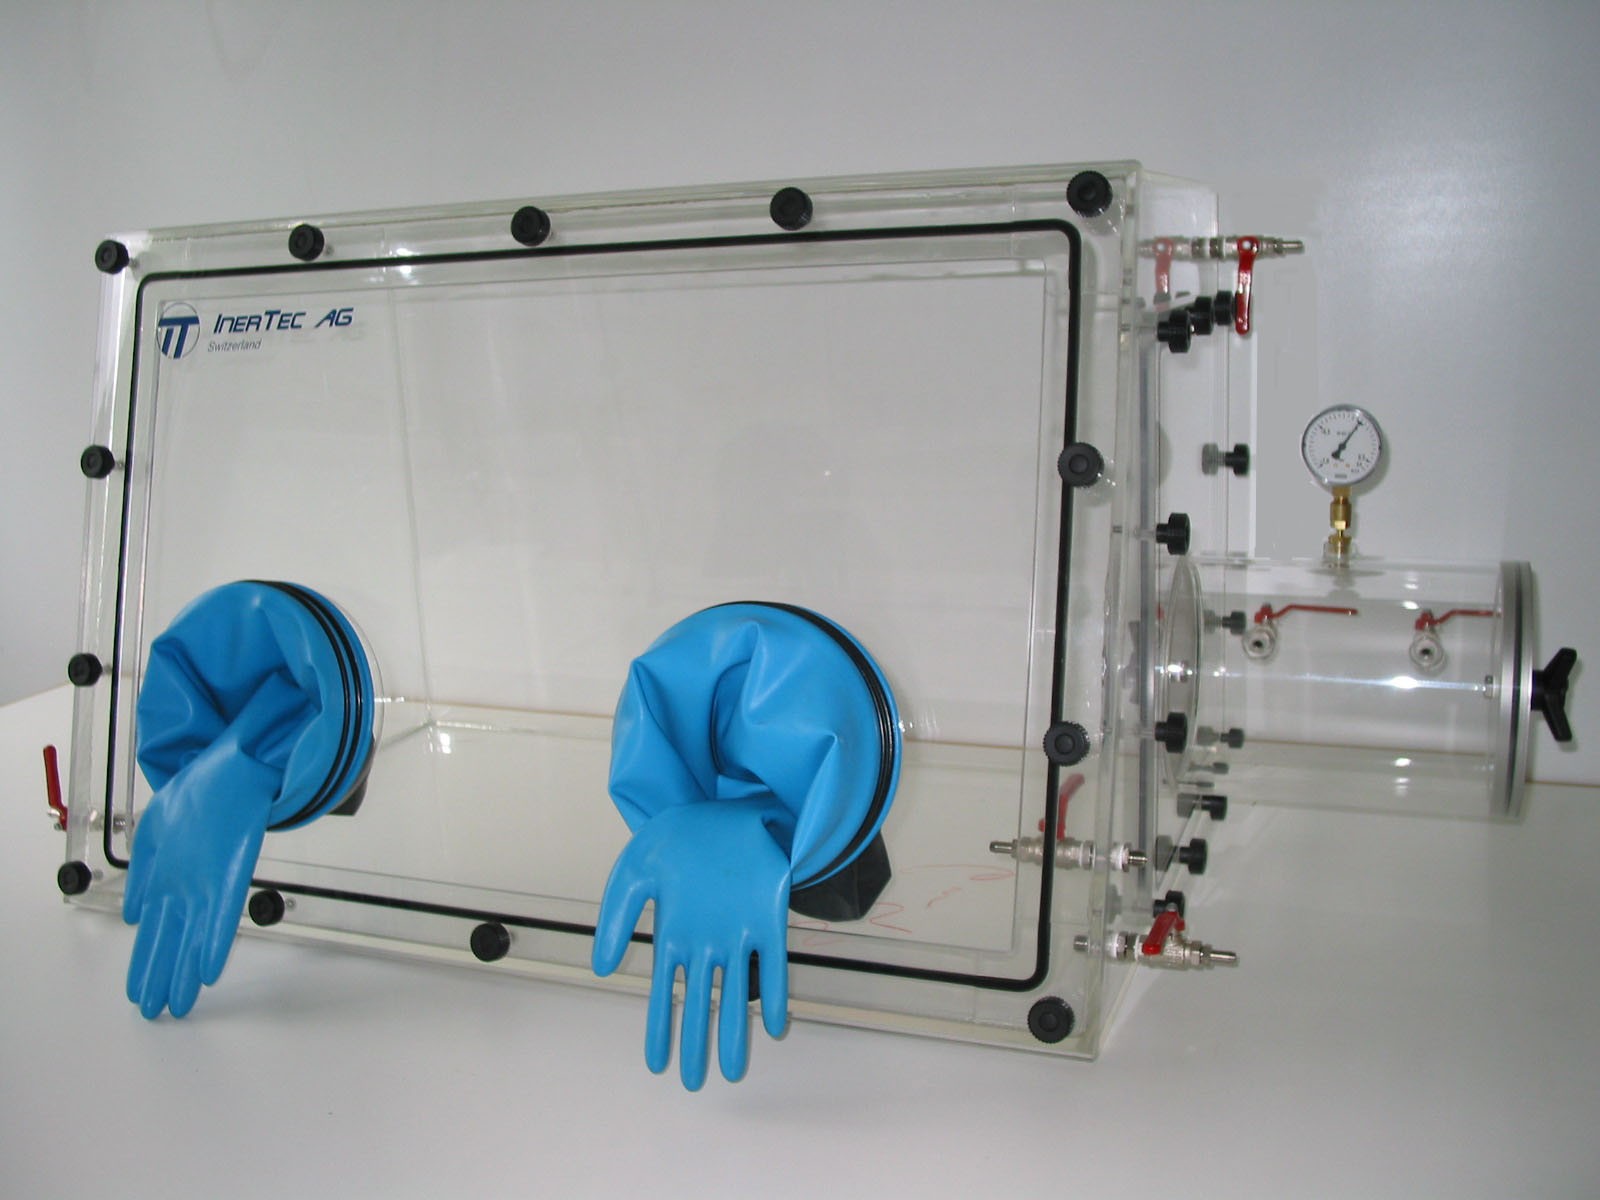 Glovebox made of acrylic&gt; Gas filling: automatic flushing with pressure control, front version: standard, side version: round vacuum lock, control: oxygen regulator with humidity display